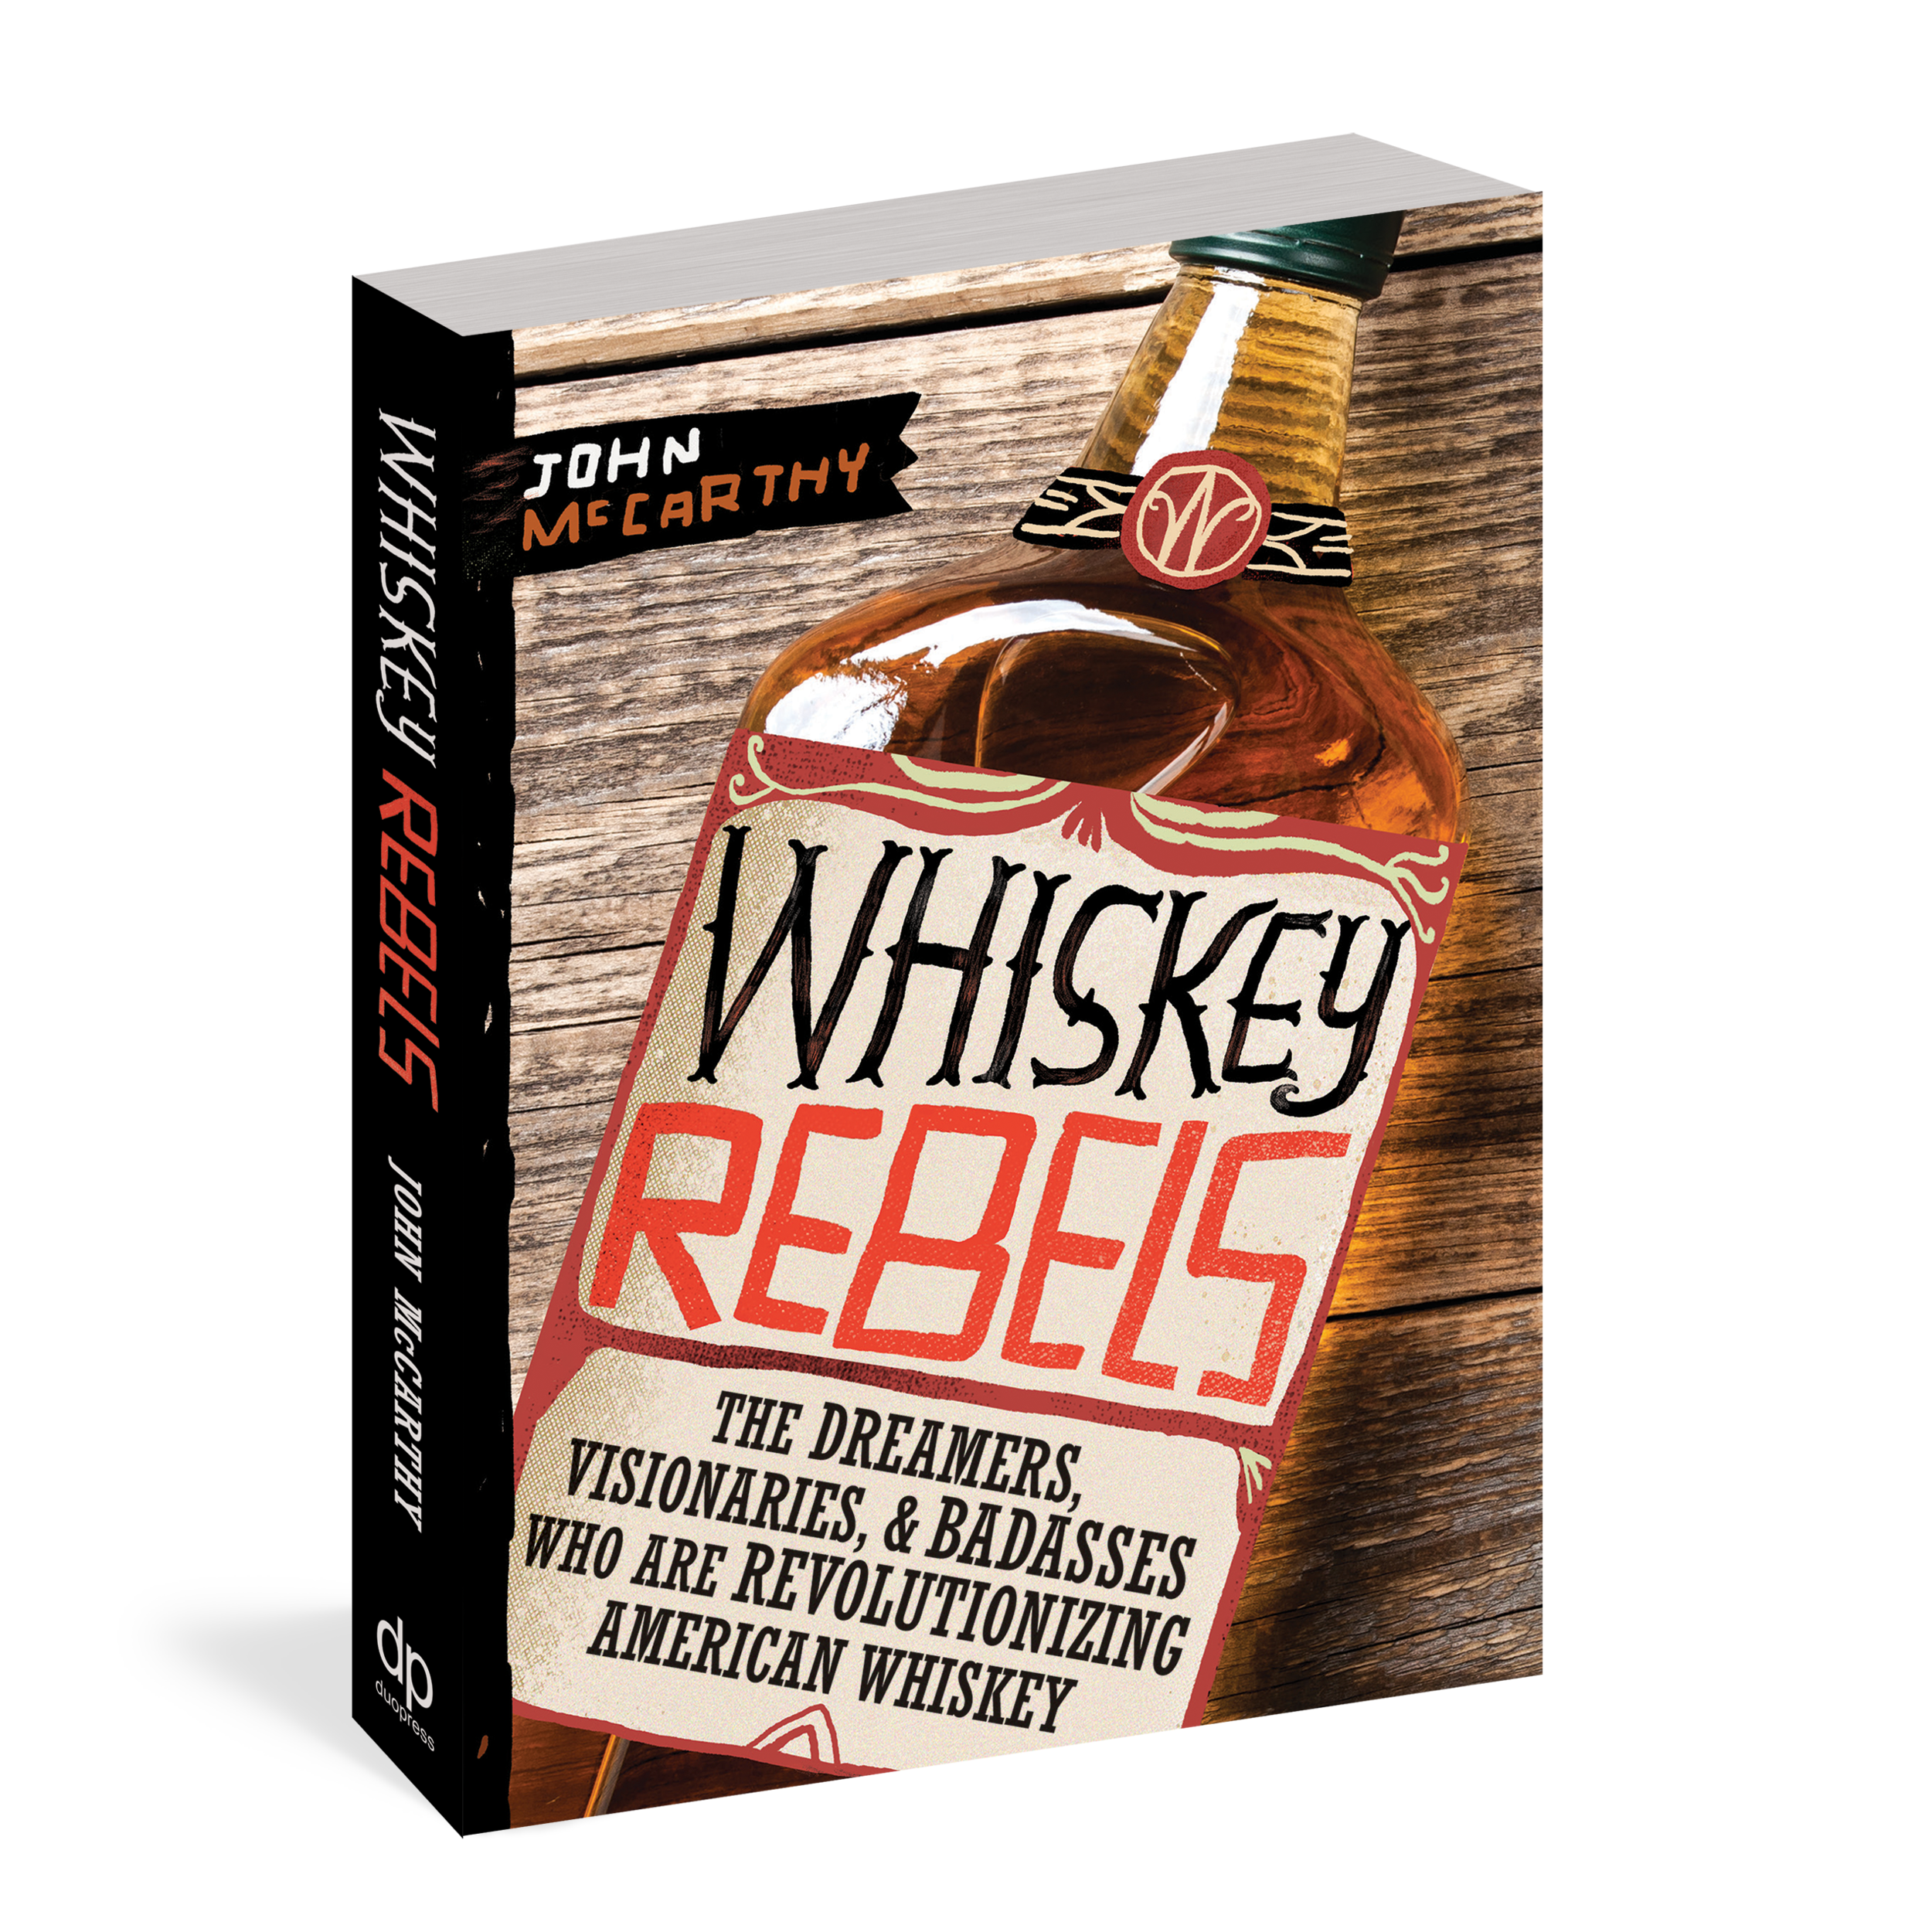 Whiskey Rebels: The Dreamers, Visionaries &amp; Badasses Who Are Revolutionizing American Whiskey (Copy) (Copy) (Copy) (Copy)